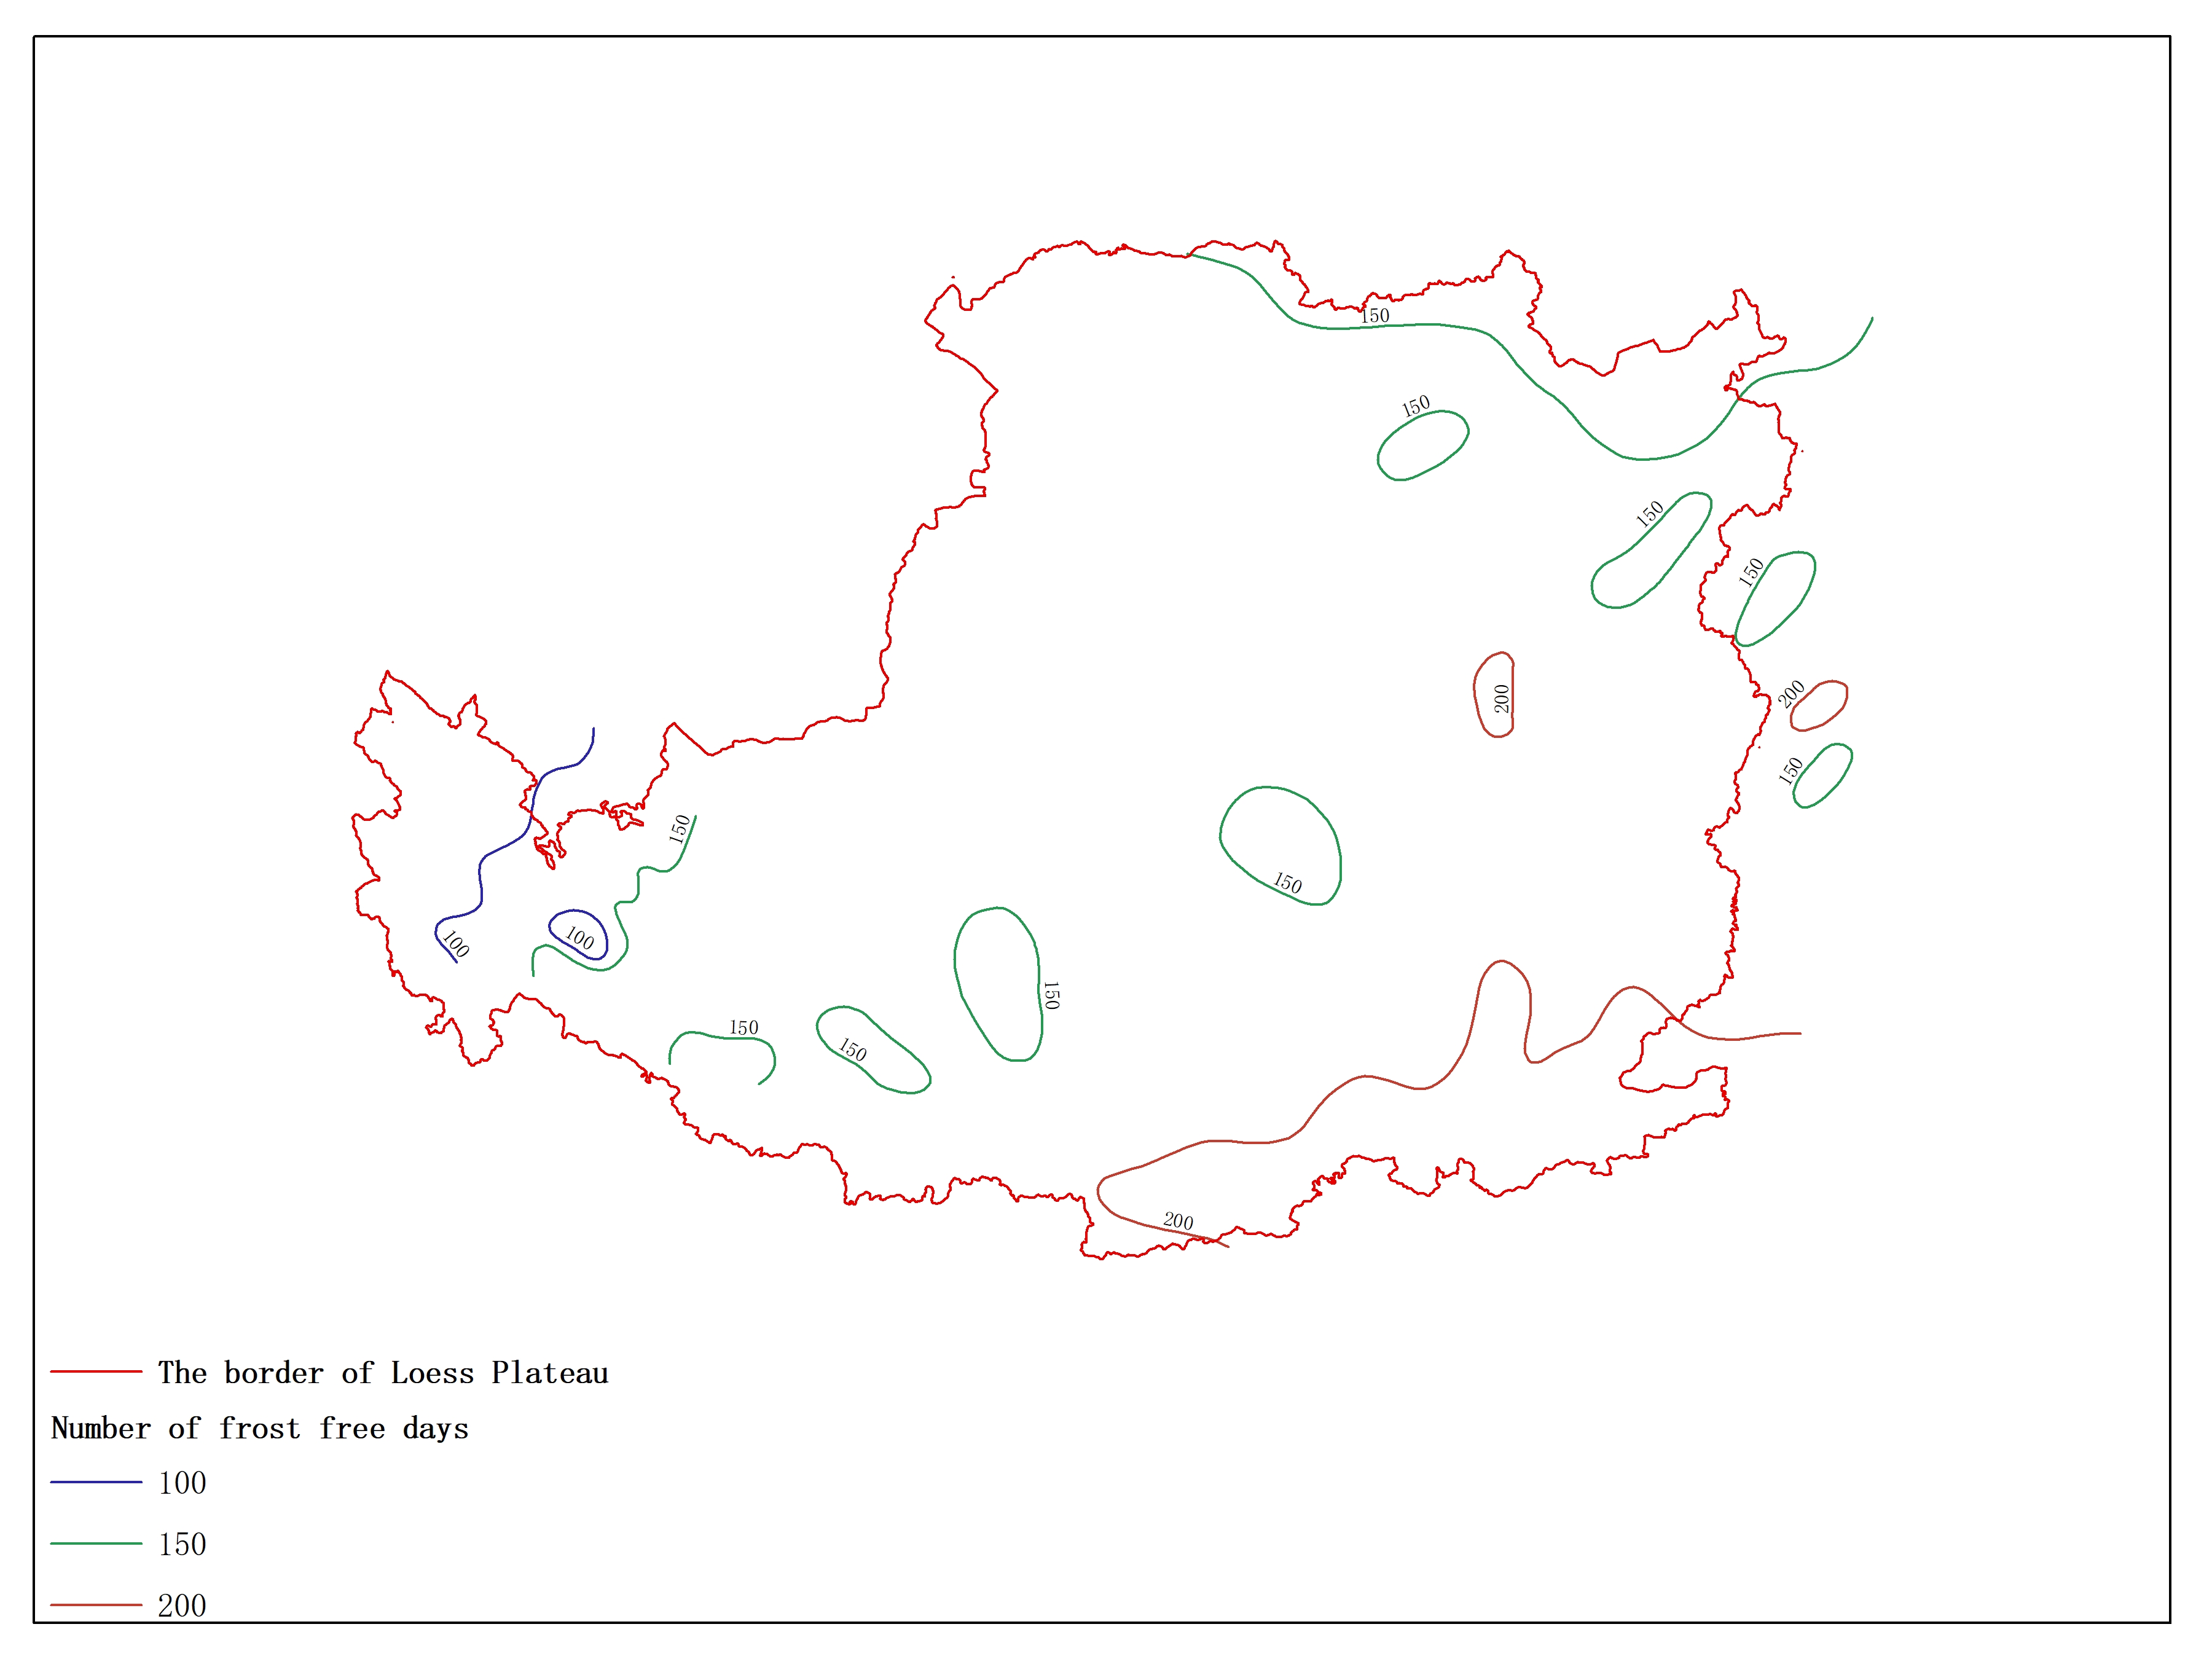 Agricultural climate resource atlas of Loess Plateau-Number of frost free days